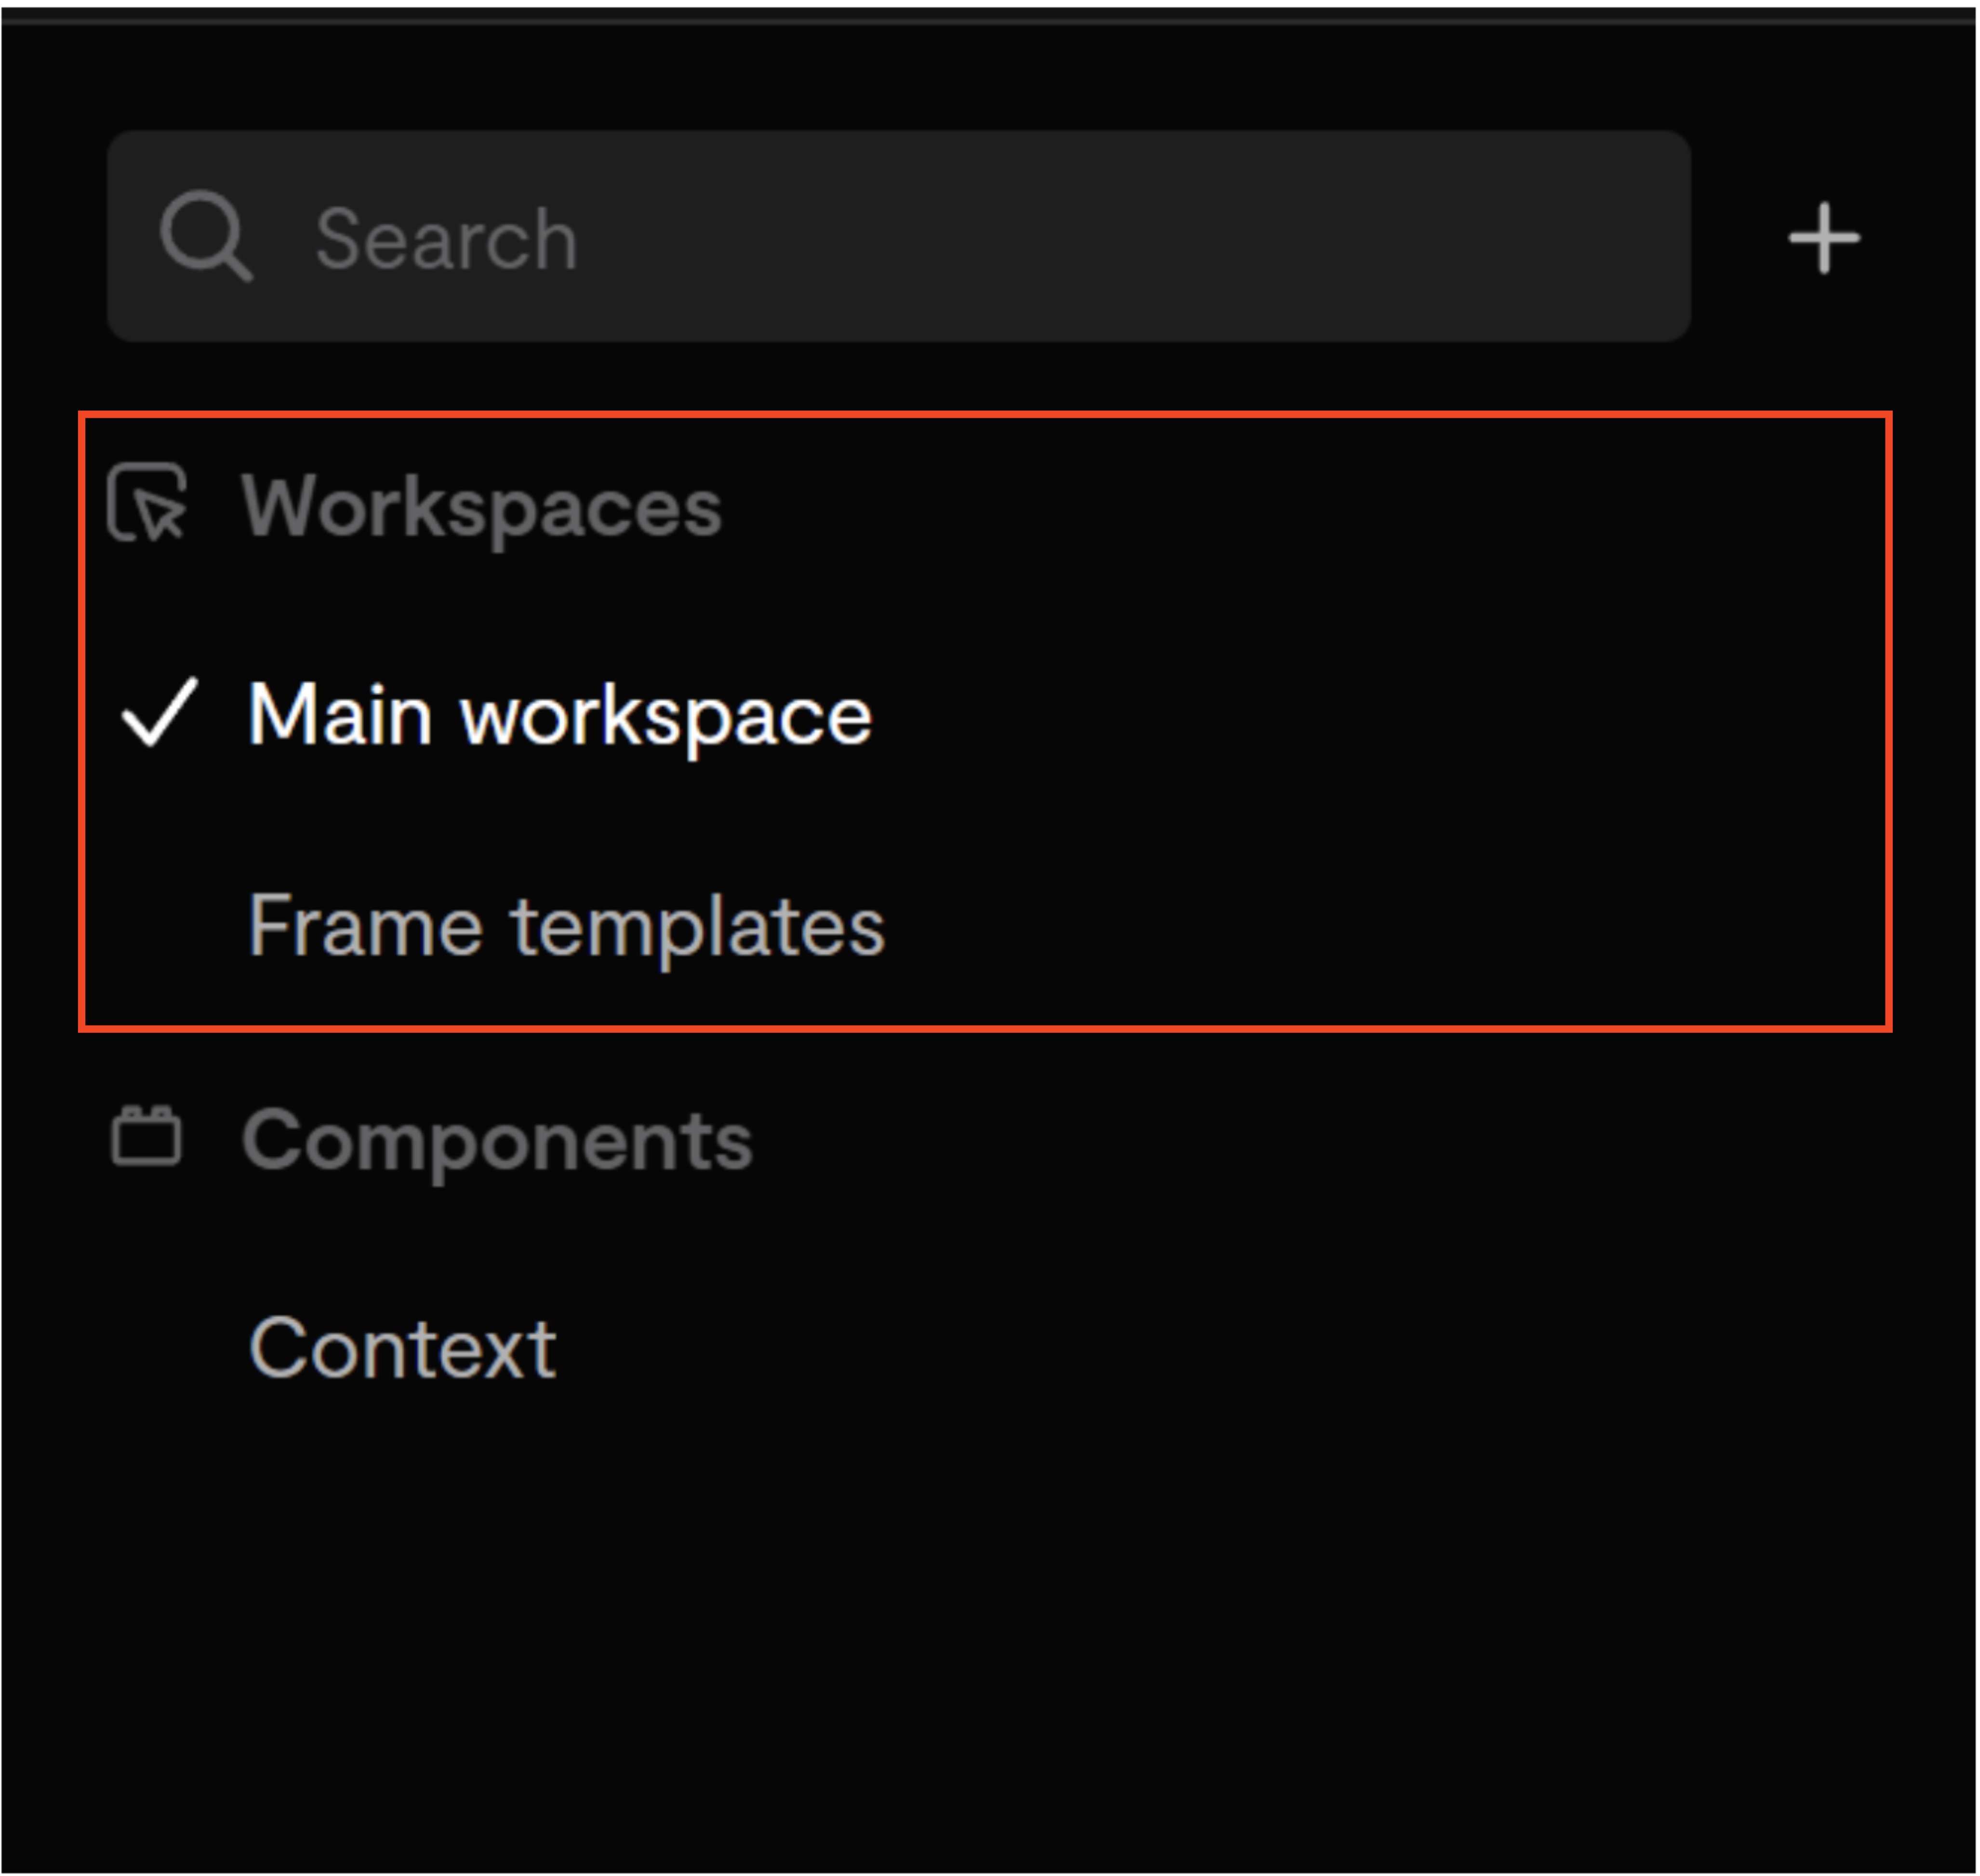 Workspaces with "Main Workspace" active